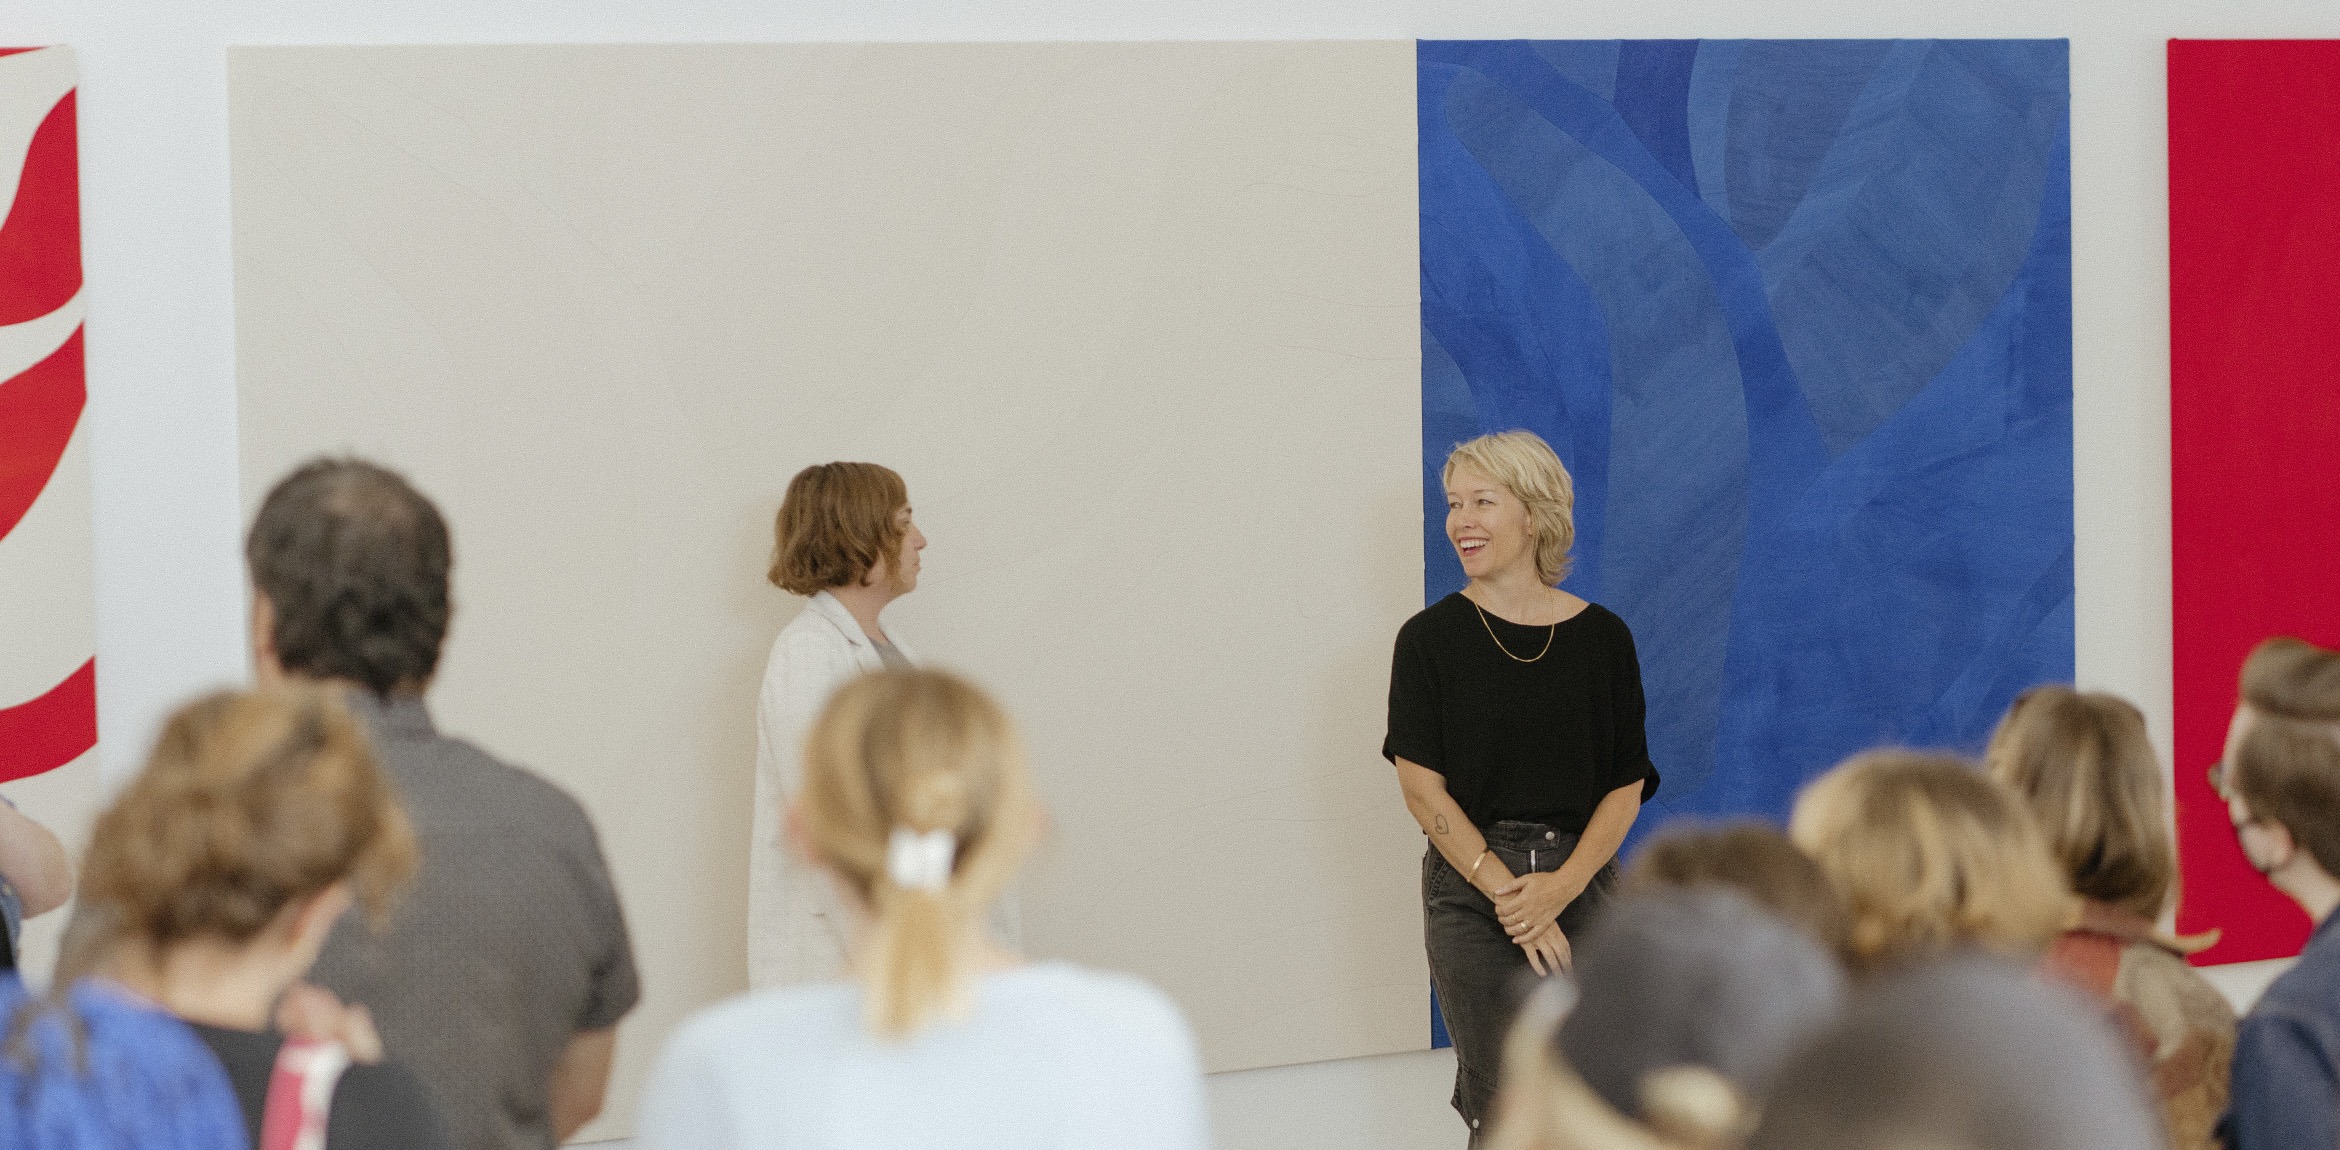 SaraSarah Crowner and Stephanie Weissberg in front of two large crowner paintings while a crowd looks on